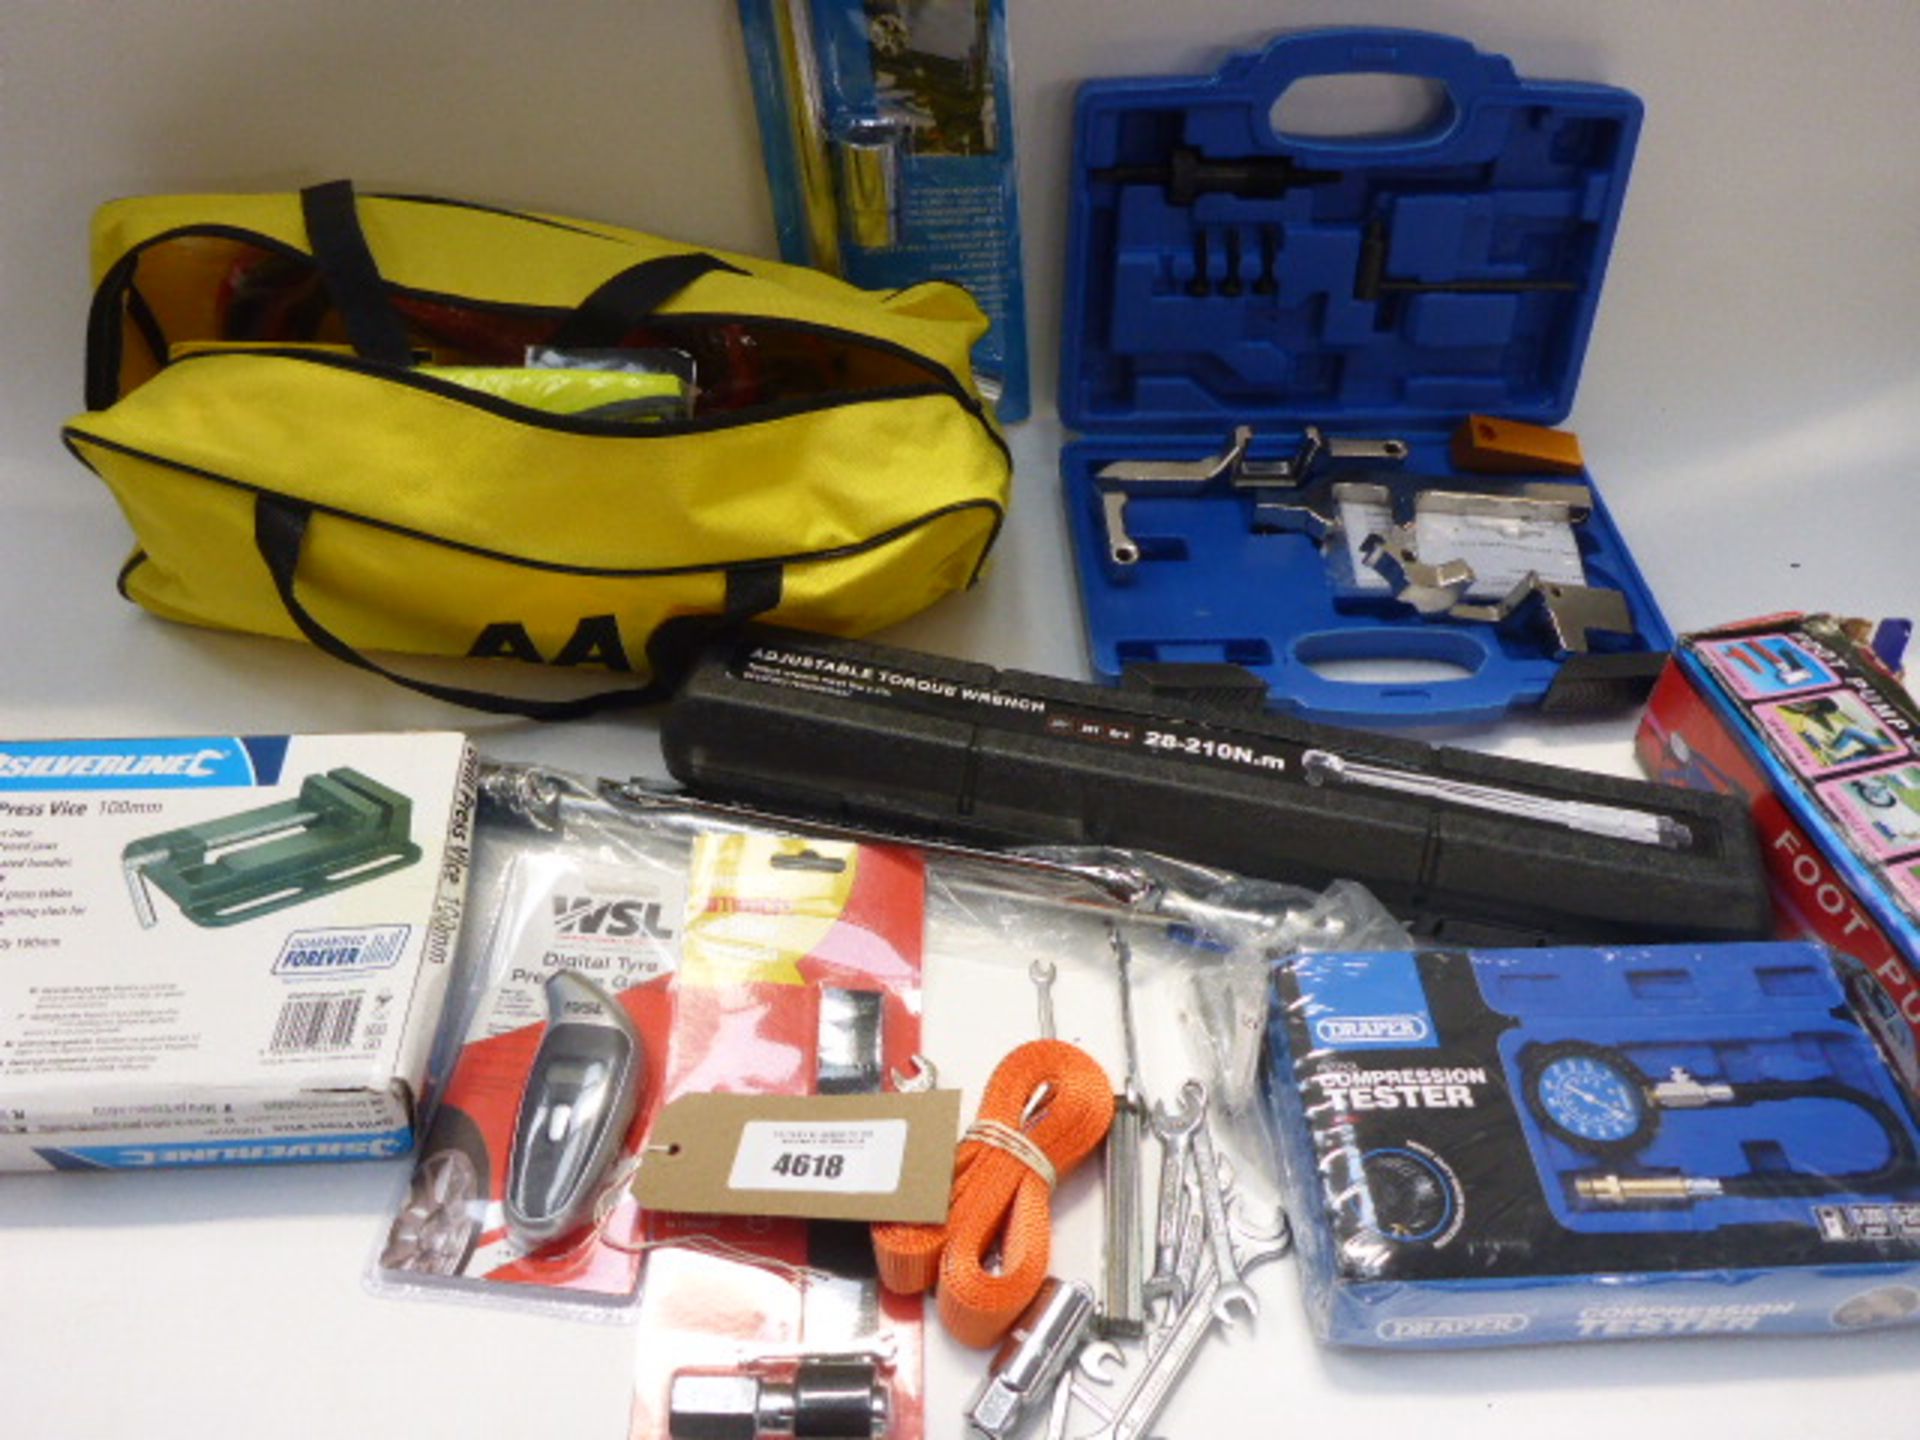 Bag containing AA breakdown kit, wheel wrench, compression tester, foot pump, torque wrench, drill